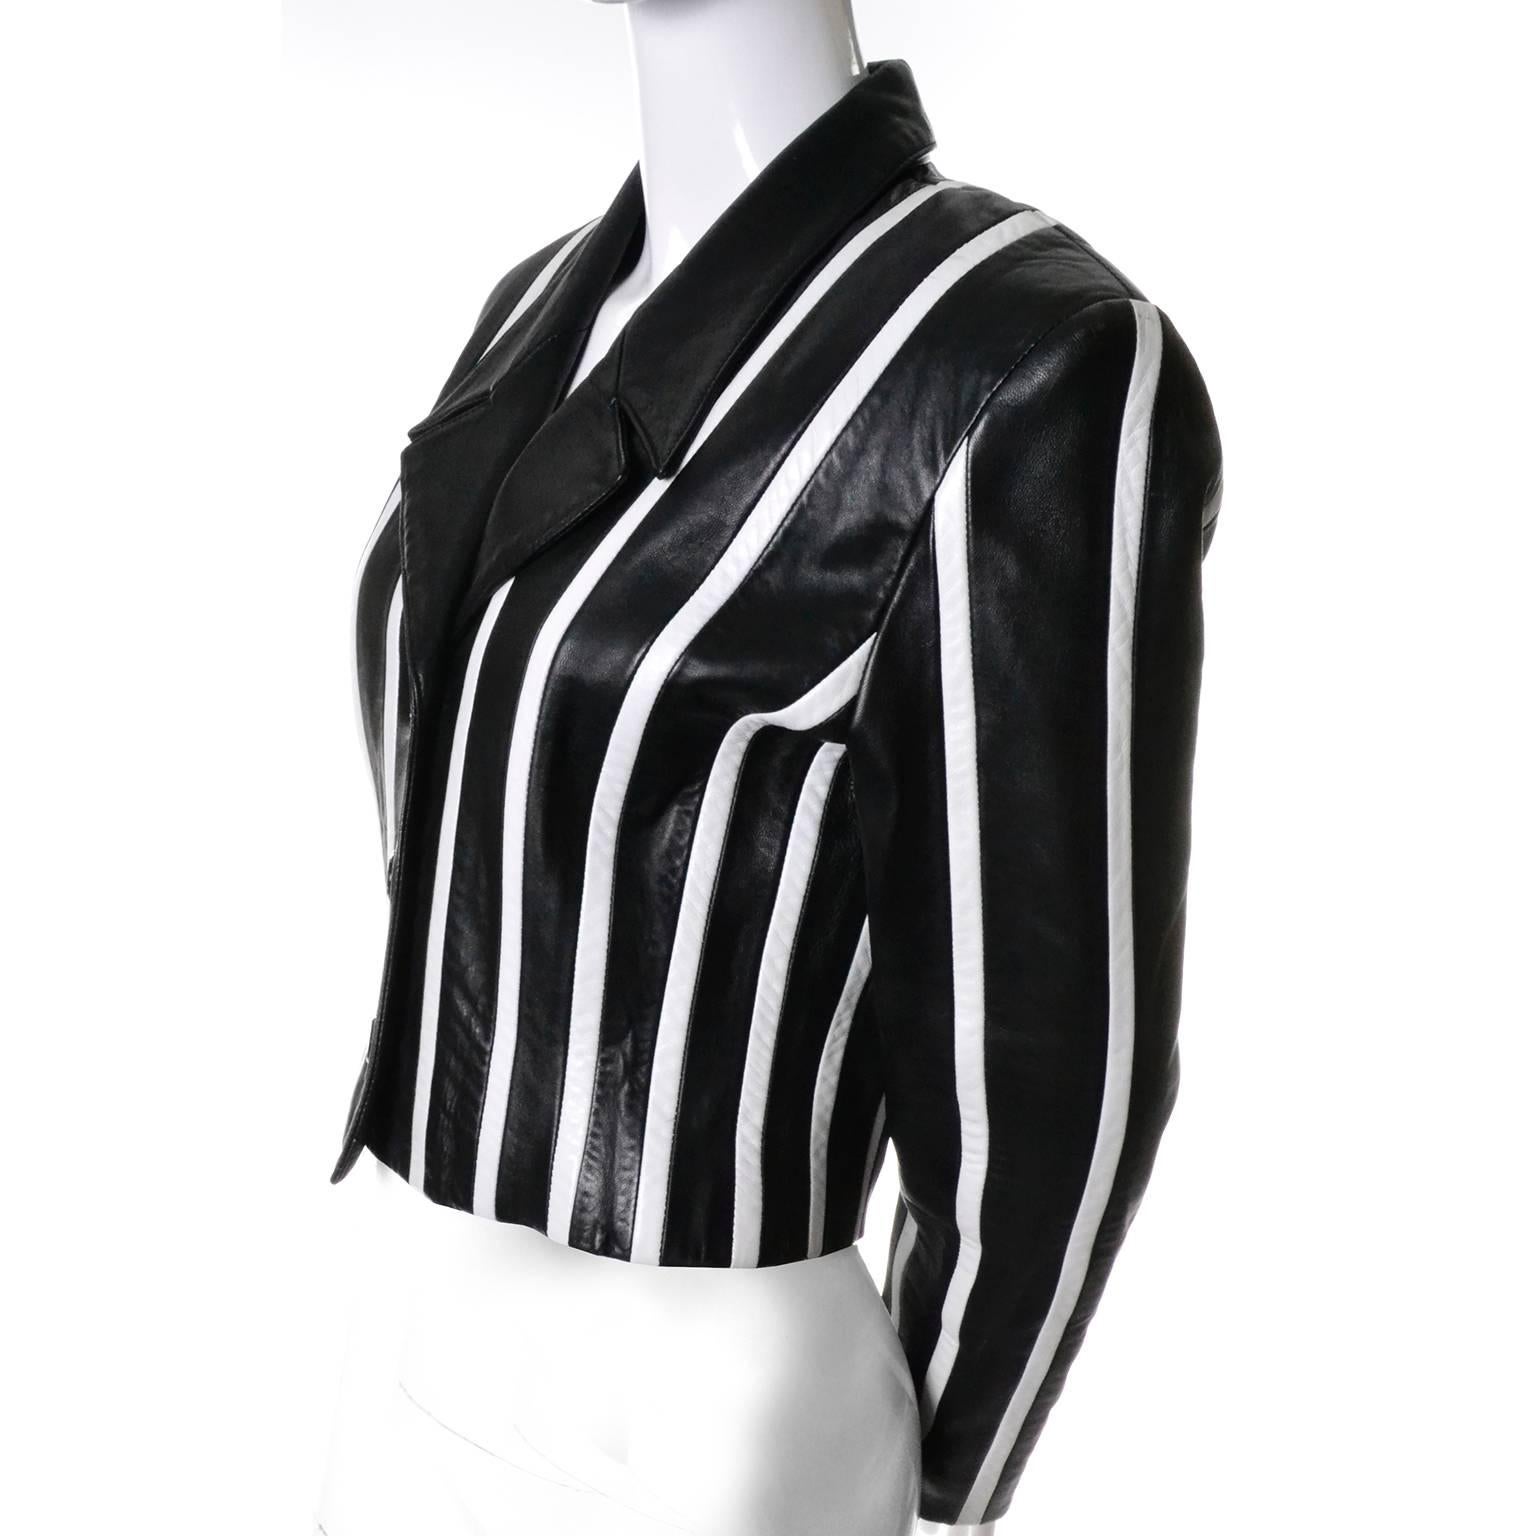 This is one of our favorite leather jackets designed by Michael Hoban for North Beach Leather.  The jacket has black leather lapels, black leather covered front buttons and the body is black with white vertical stripes.  This fully lined cropped